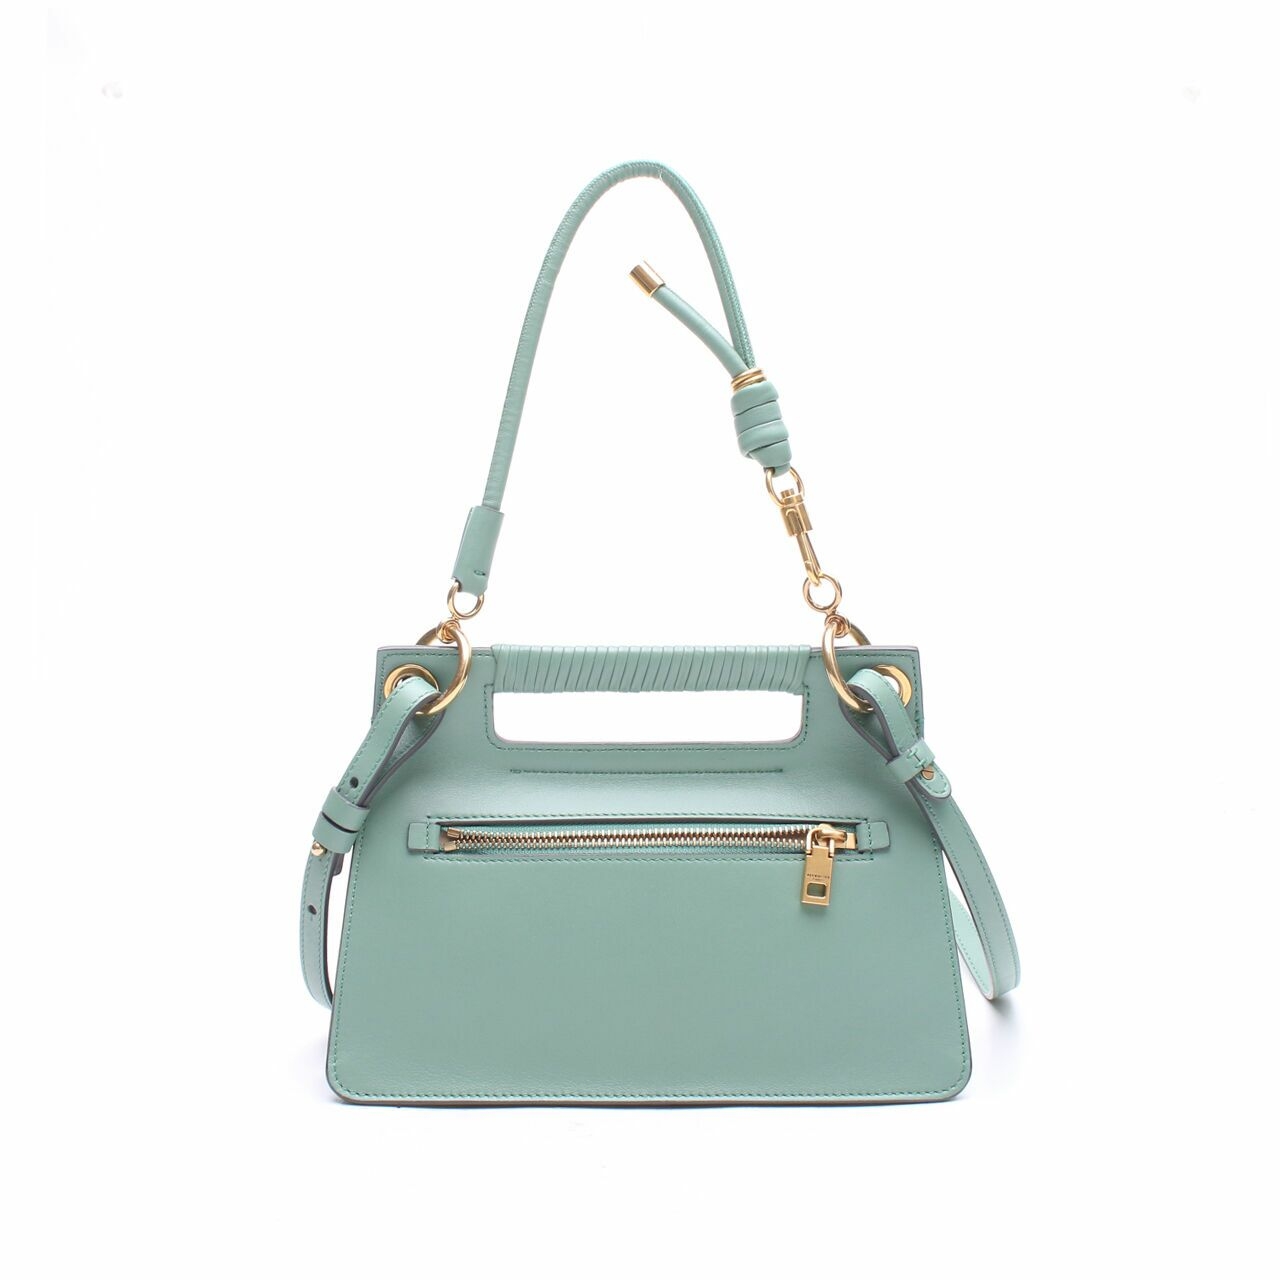 Givenchy Whip Small Green Satchel Bag